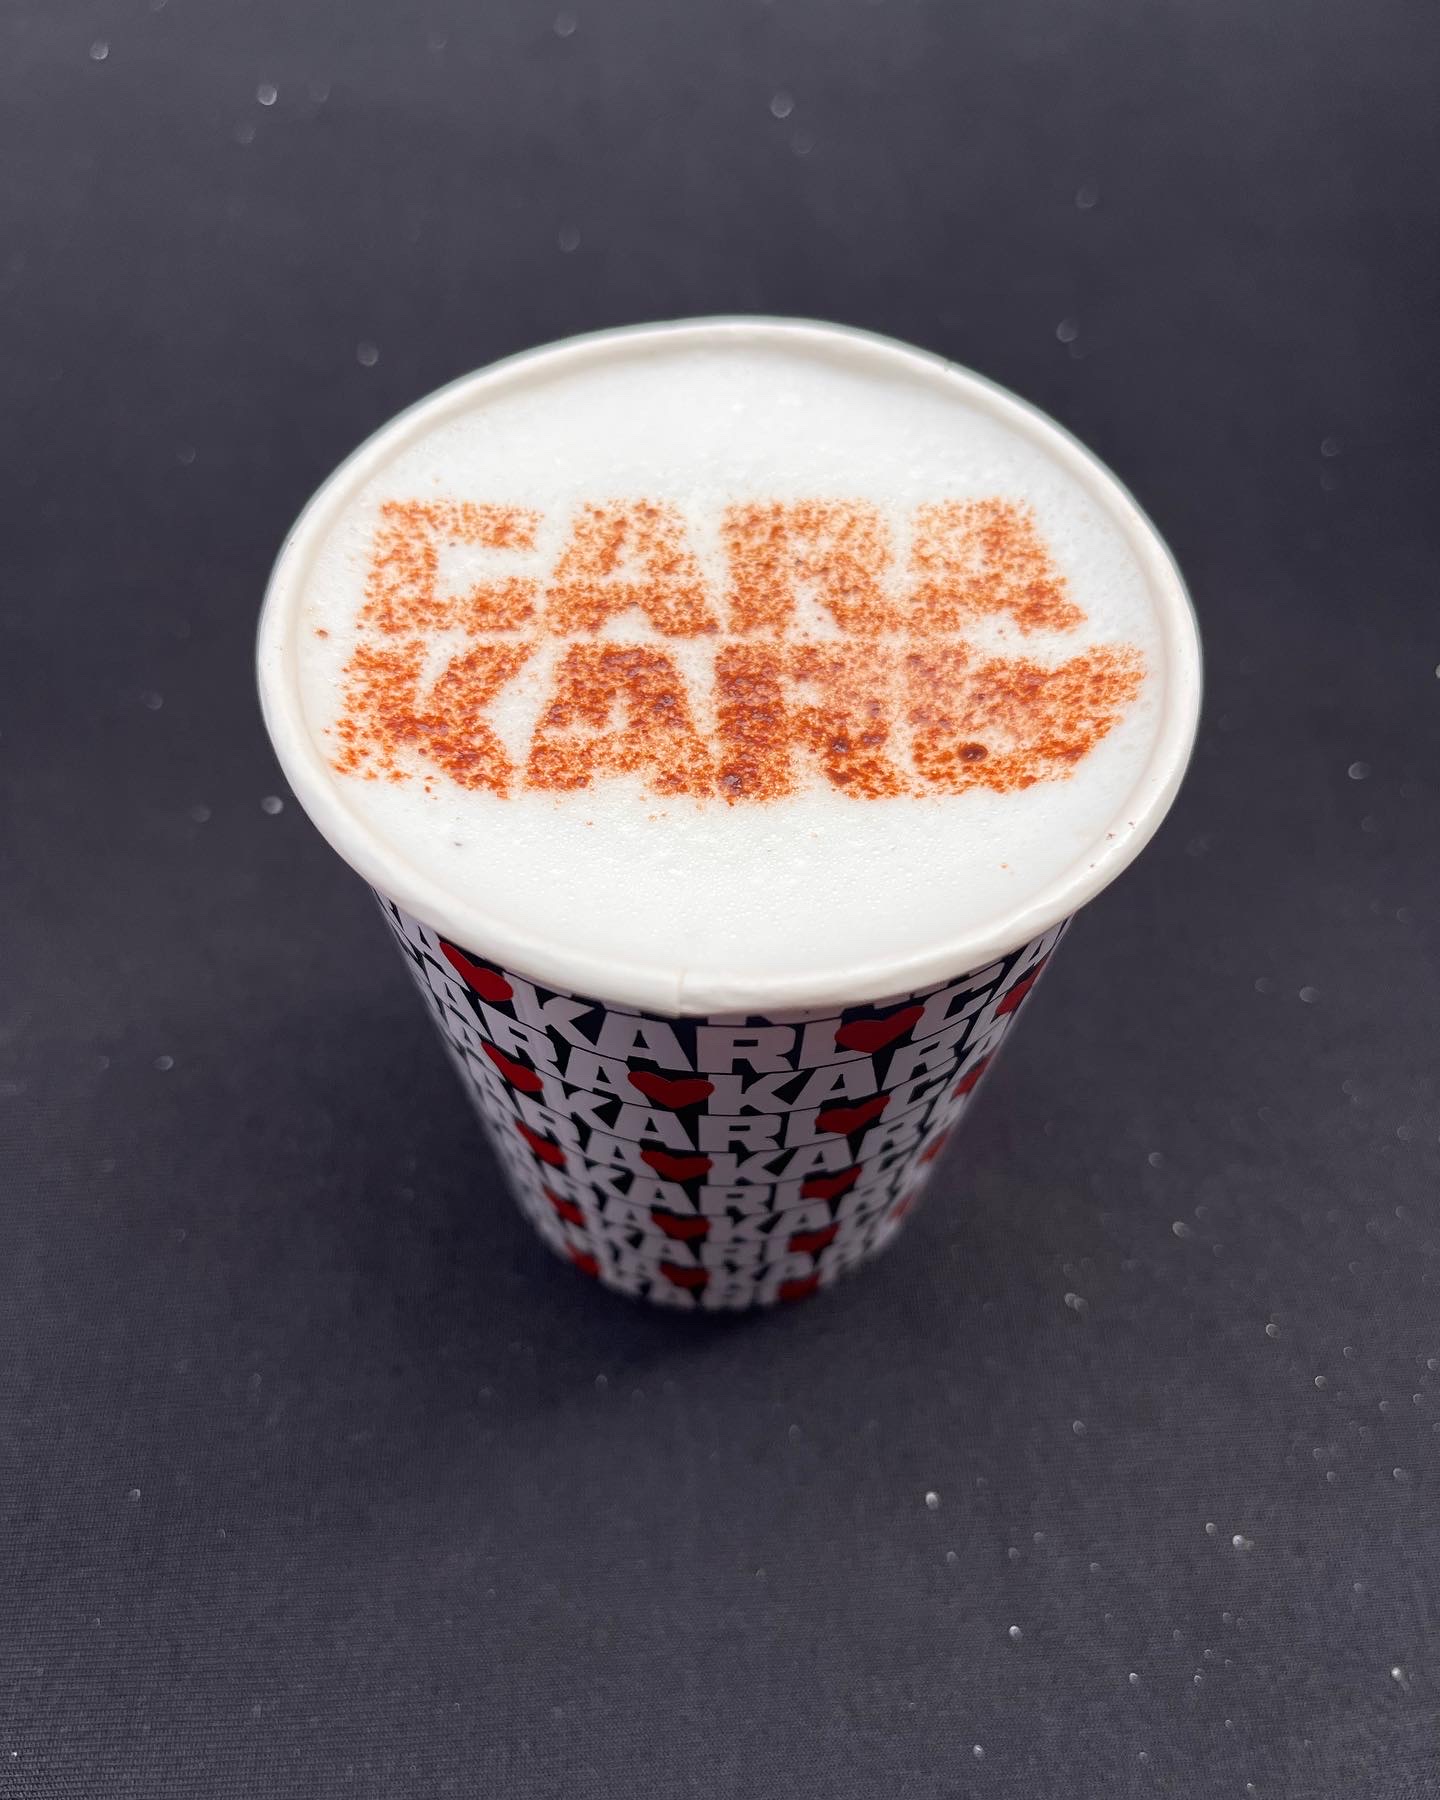 branded mobile coffee cup and latte art for Karl Lagerfeld's 'Cara loves Karl' promotion